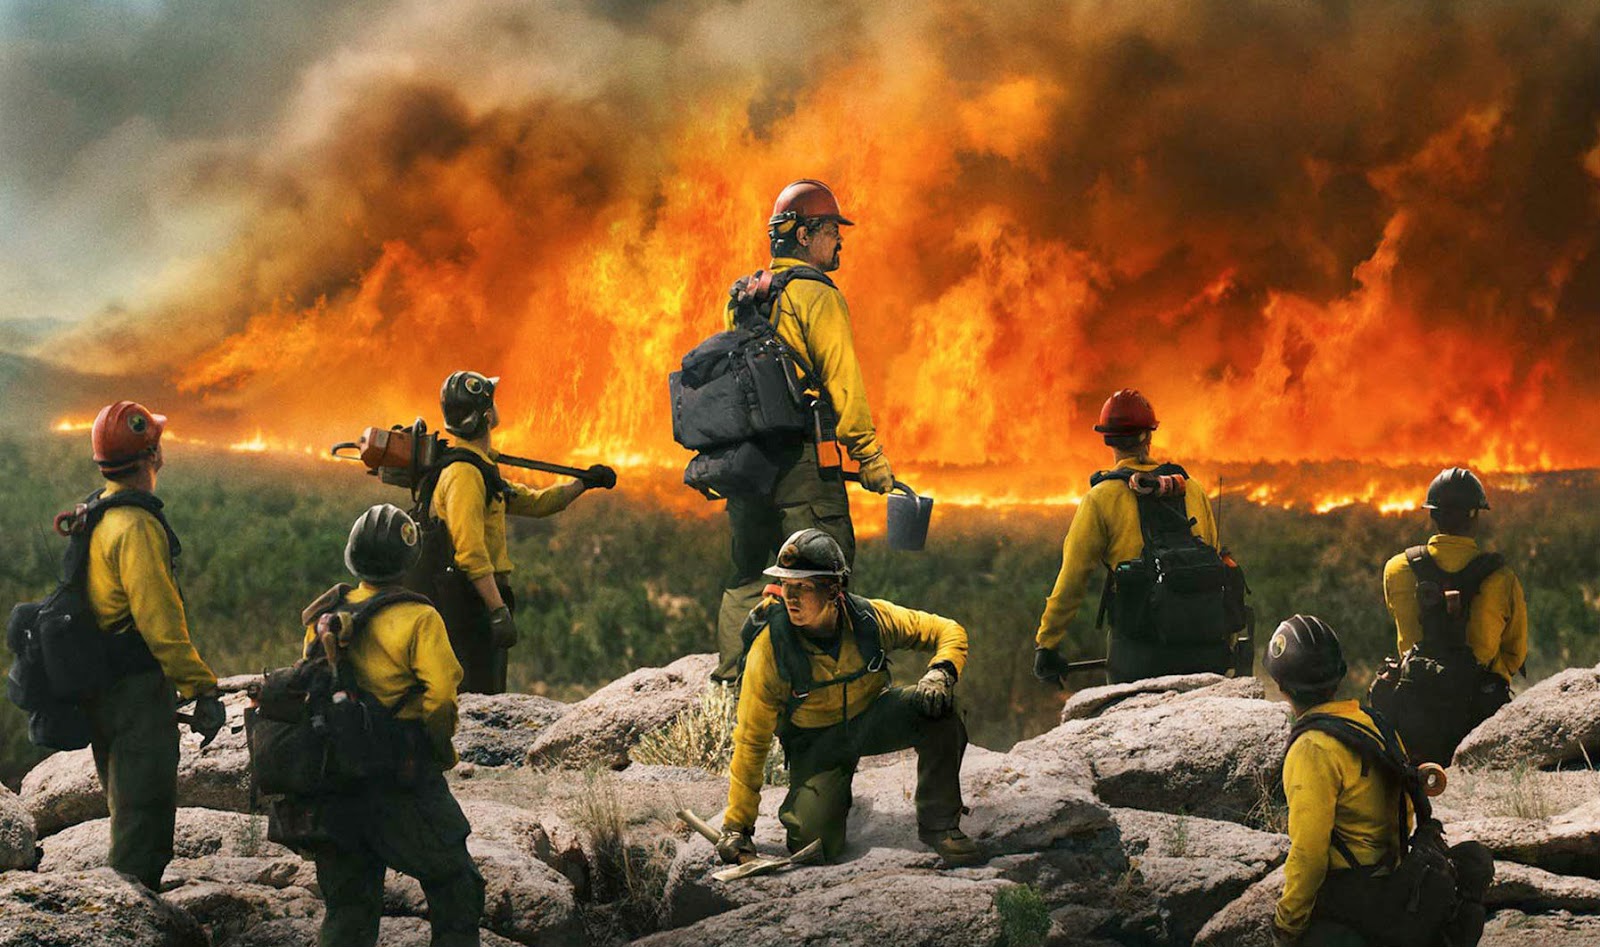 MOVIES: Only the Brave Cast and Creative Team Talks Authenticity and Brotherhood